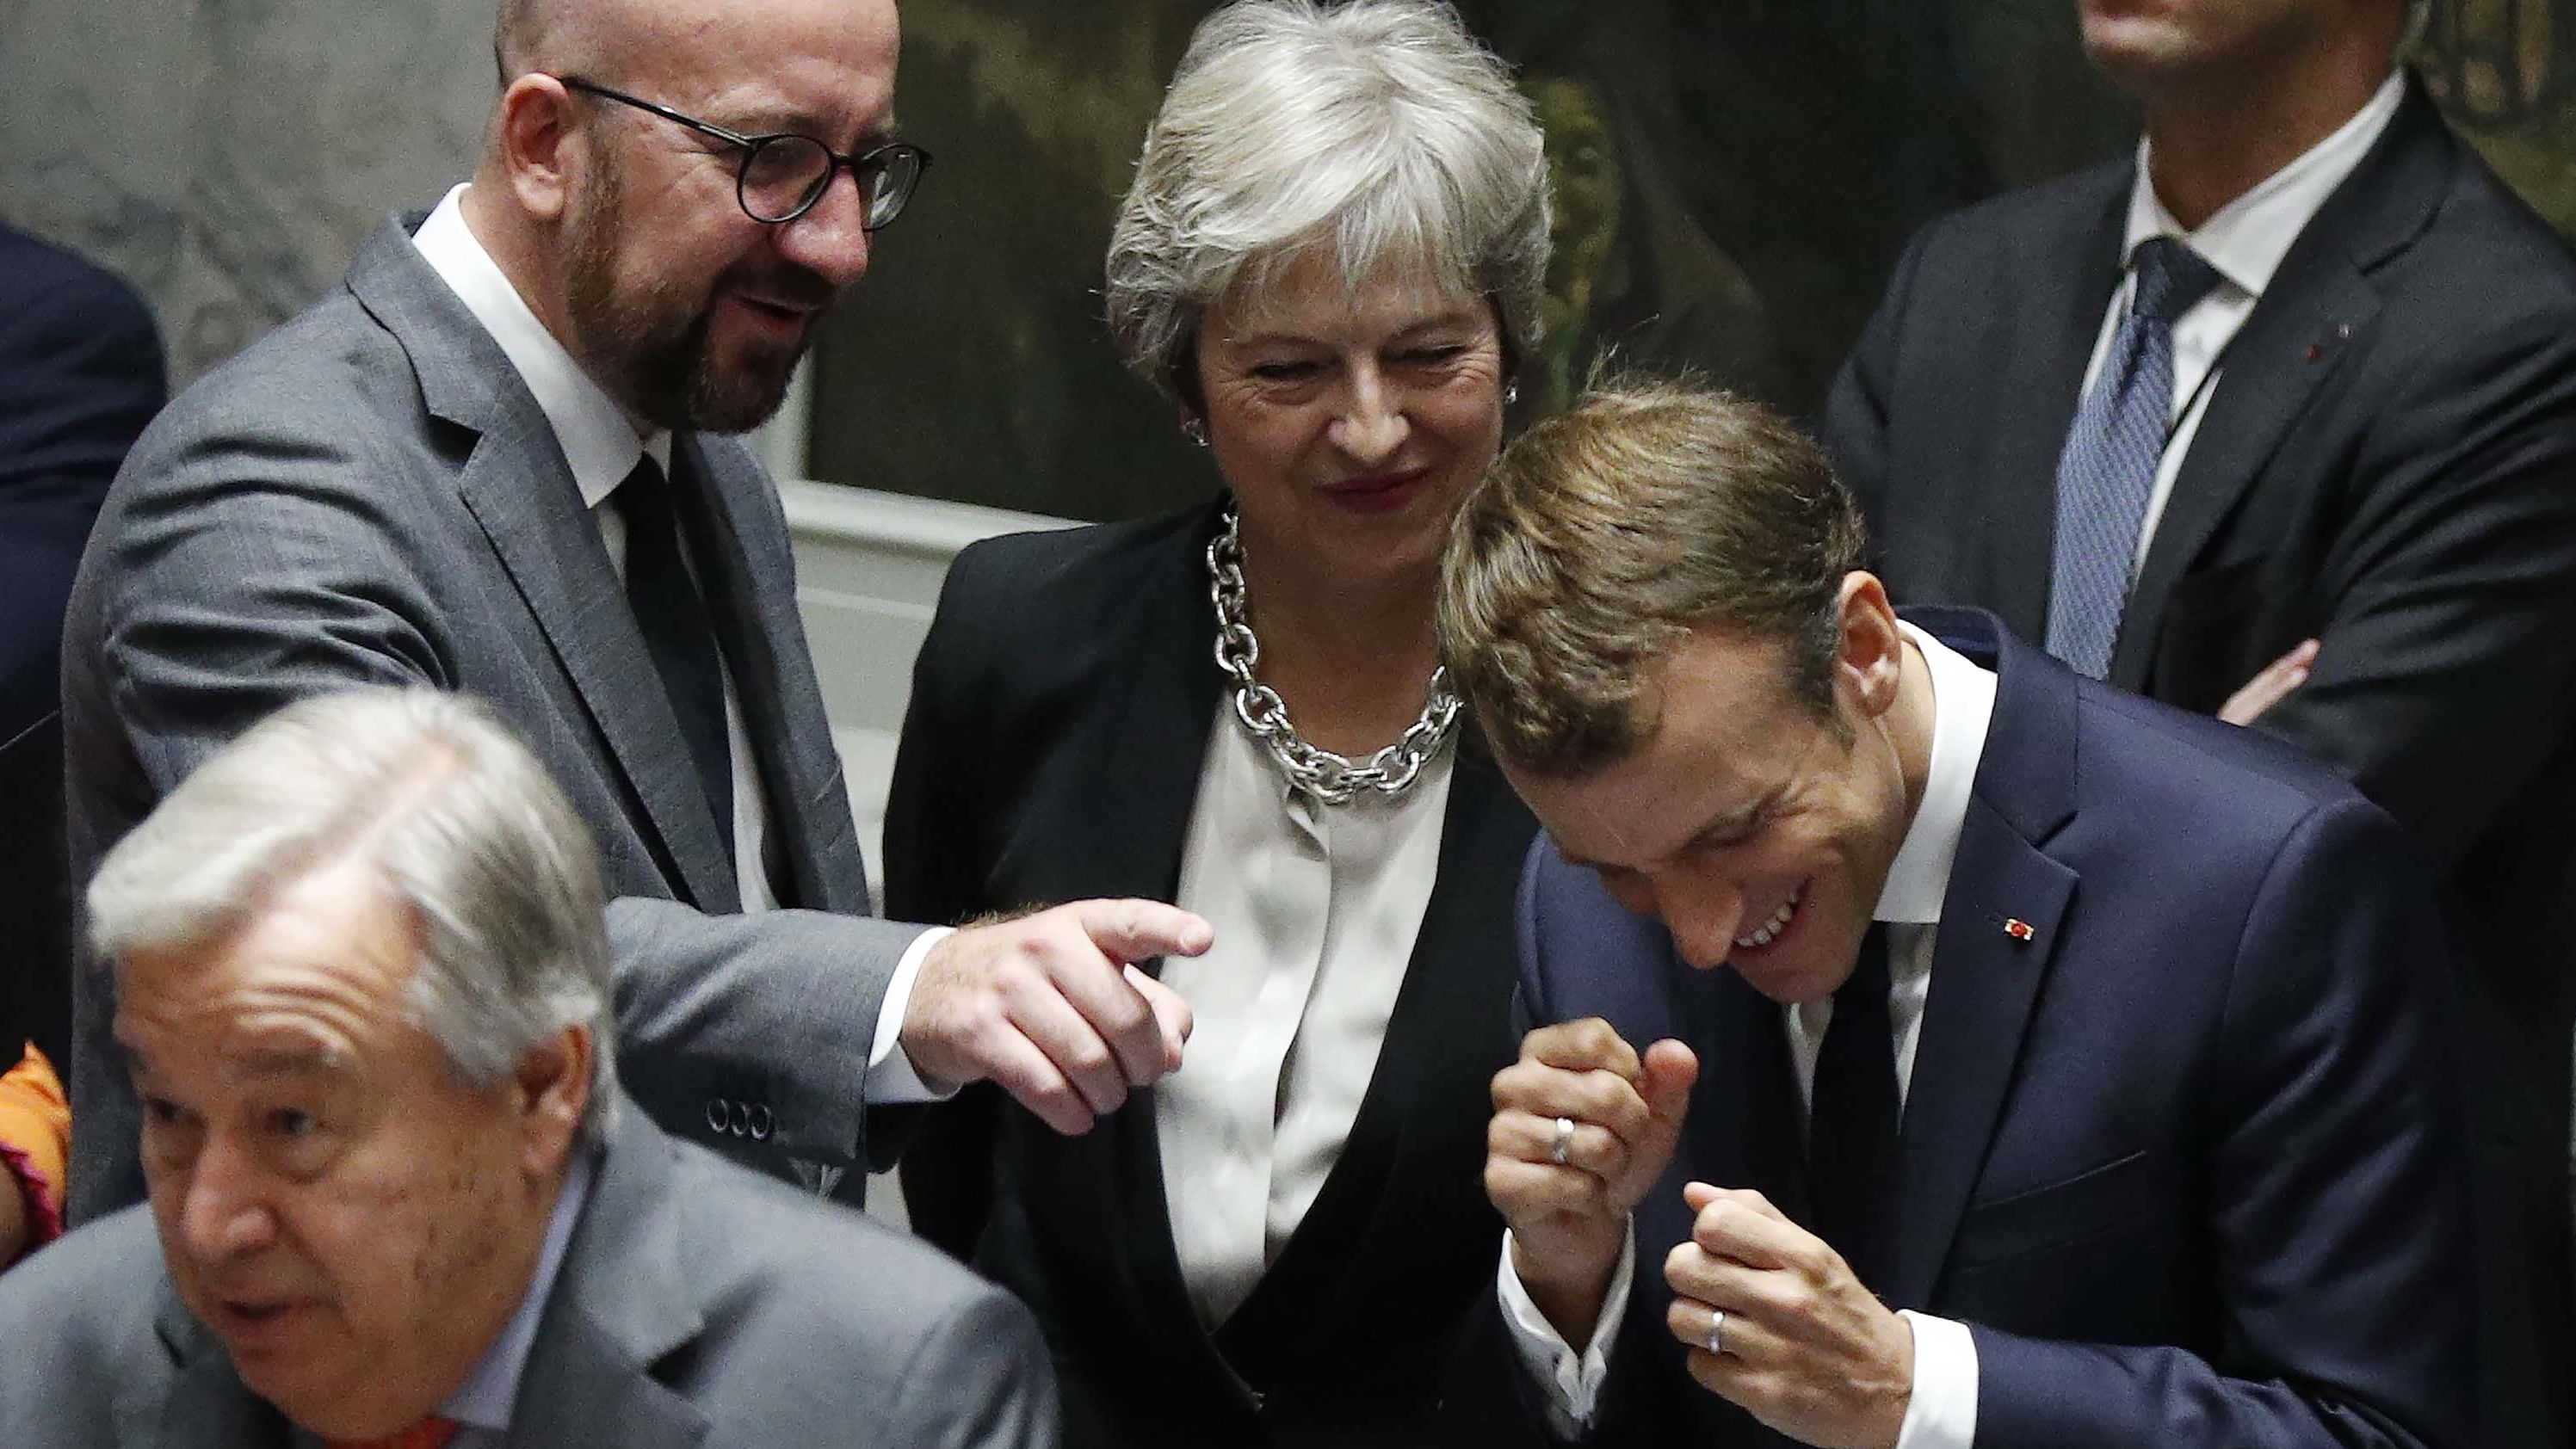 From left, Belgian Prime Minister Charles Michel, British Prime Minister Theresa May and French President Emmanuel Macron share a laugh before Wednesday's Security Council meeting.